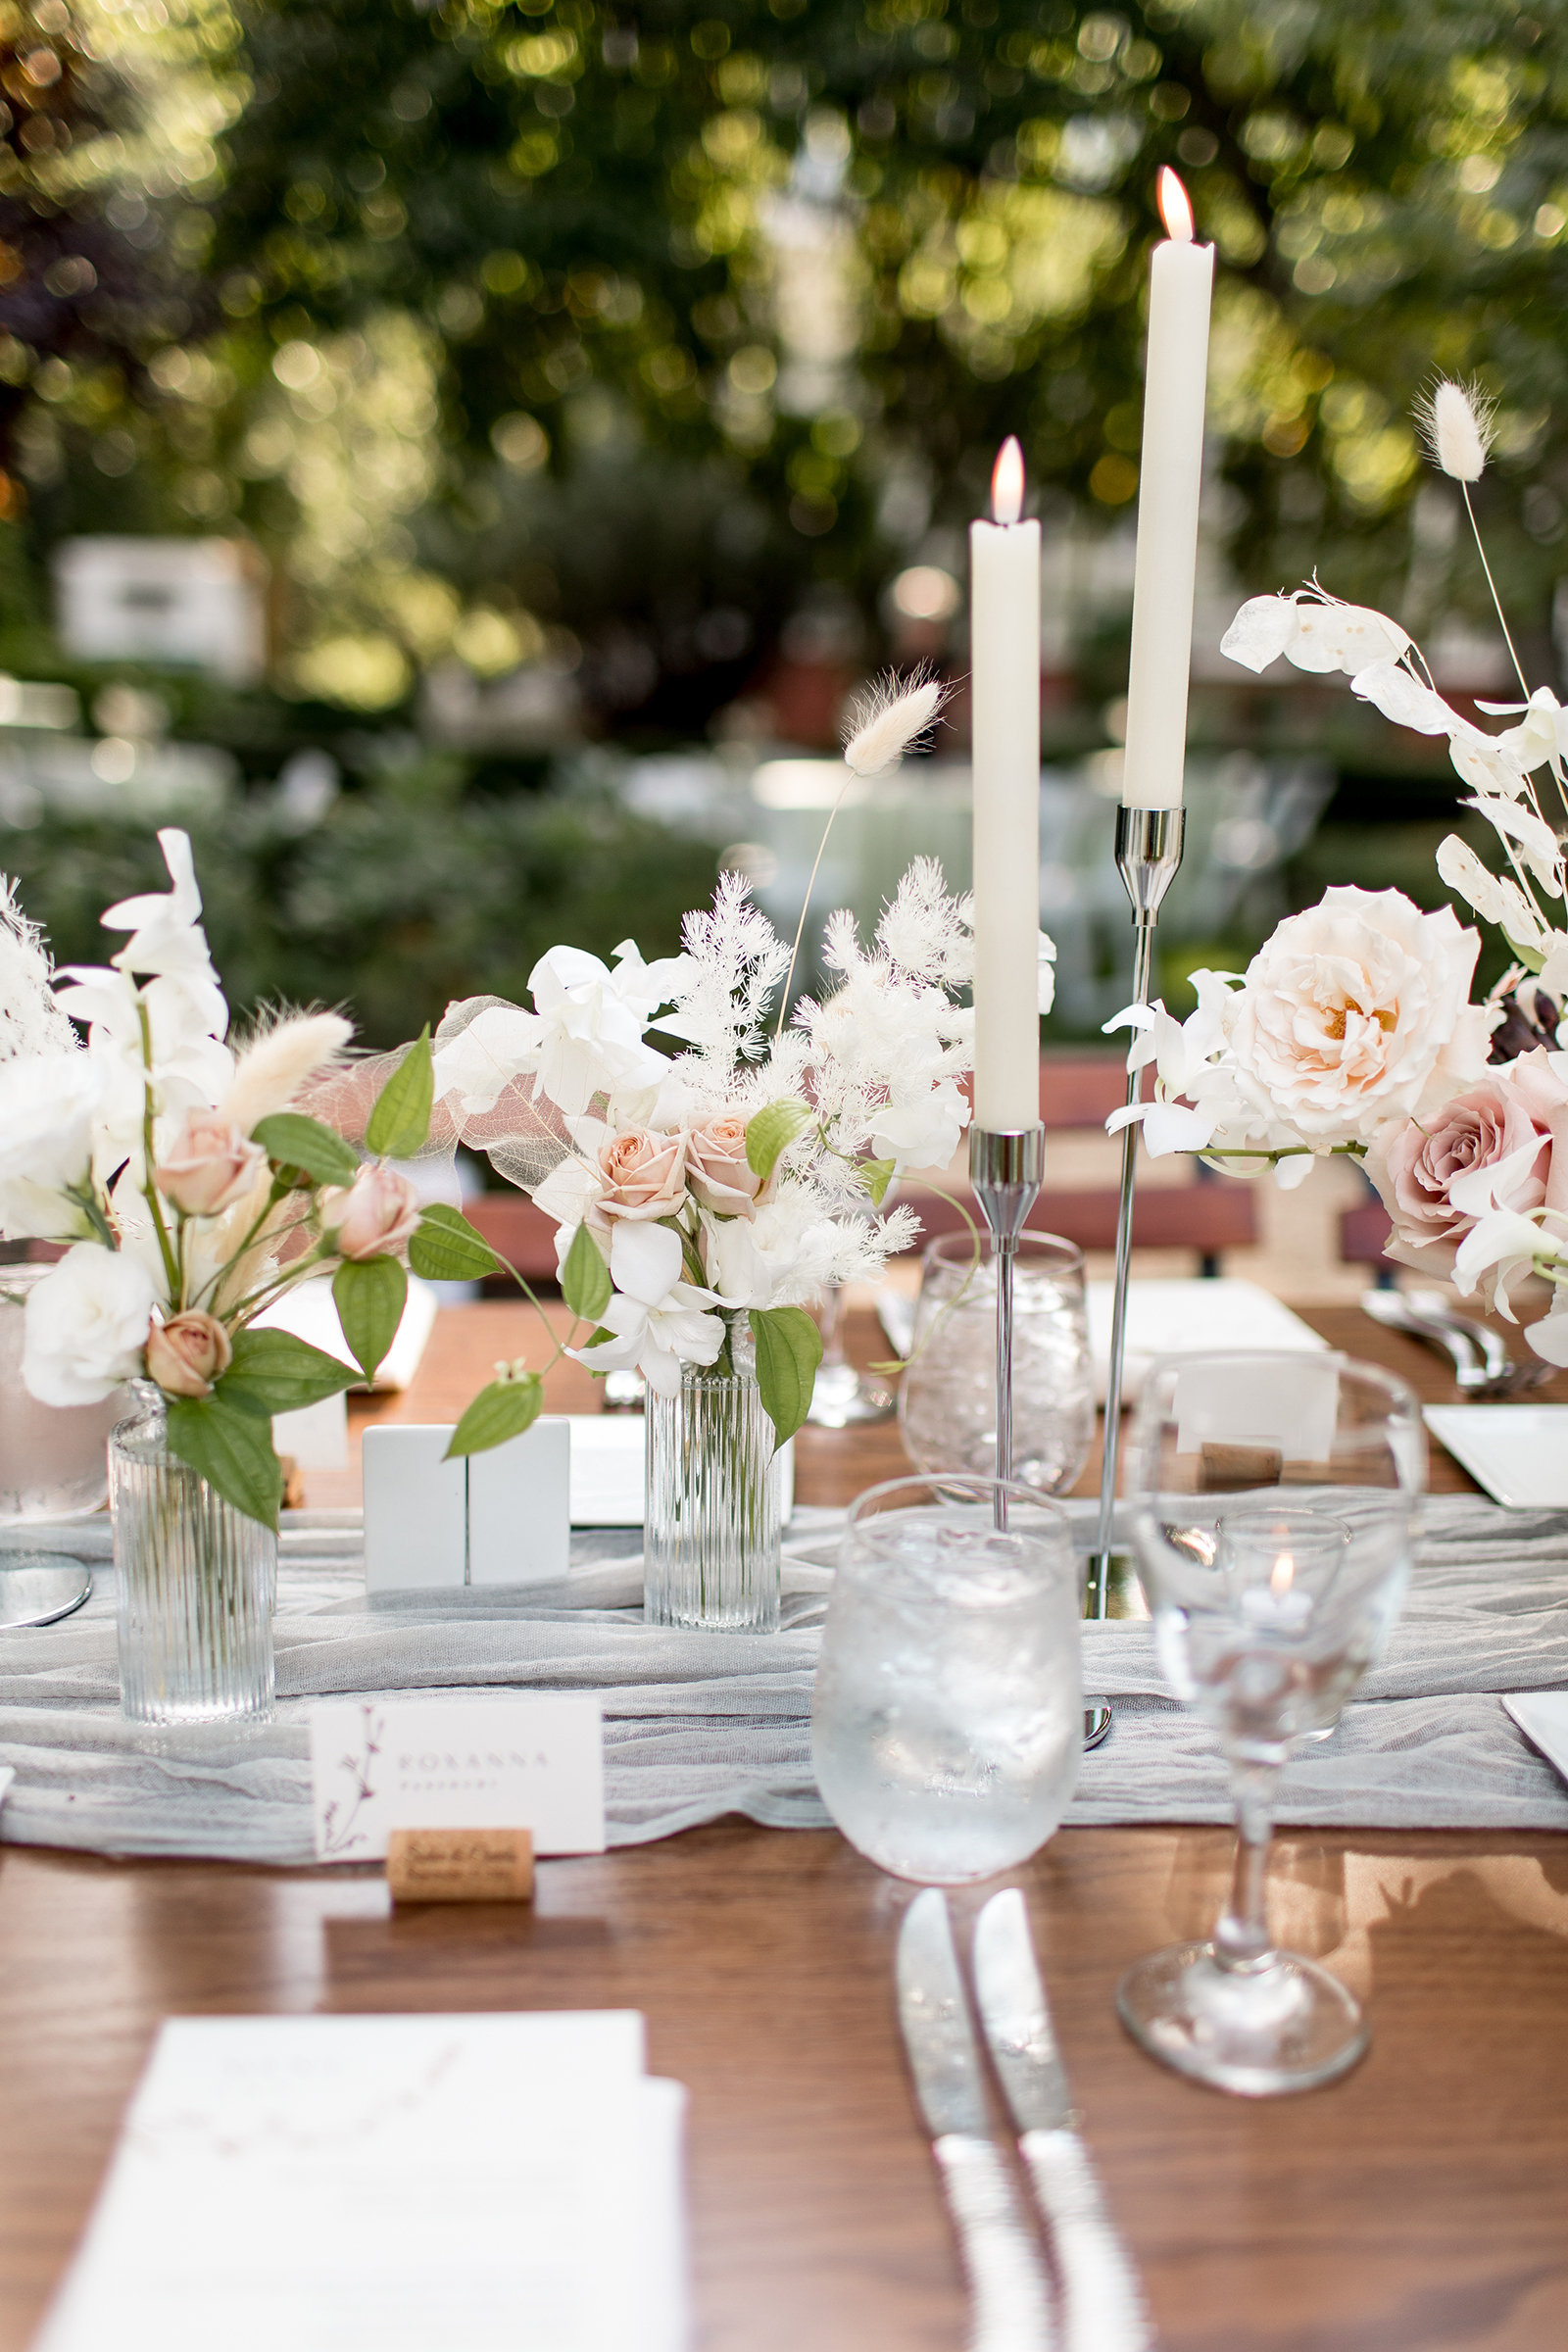 blush and neutrals floral centerpieces in bud vases